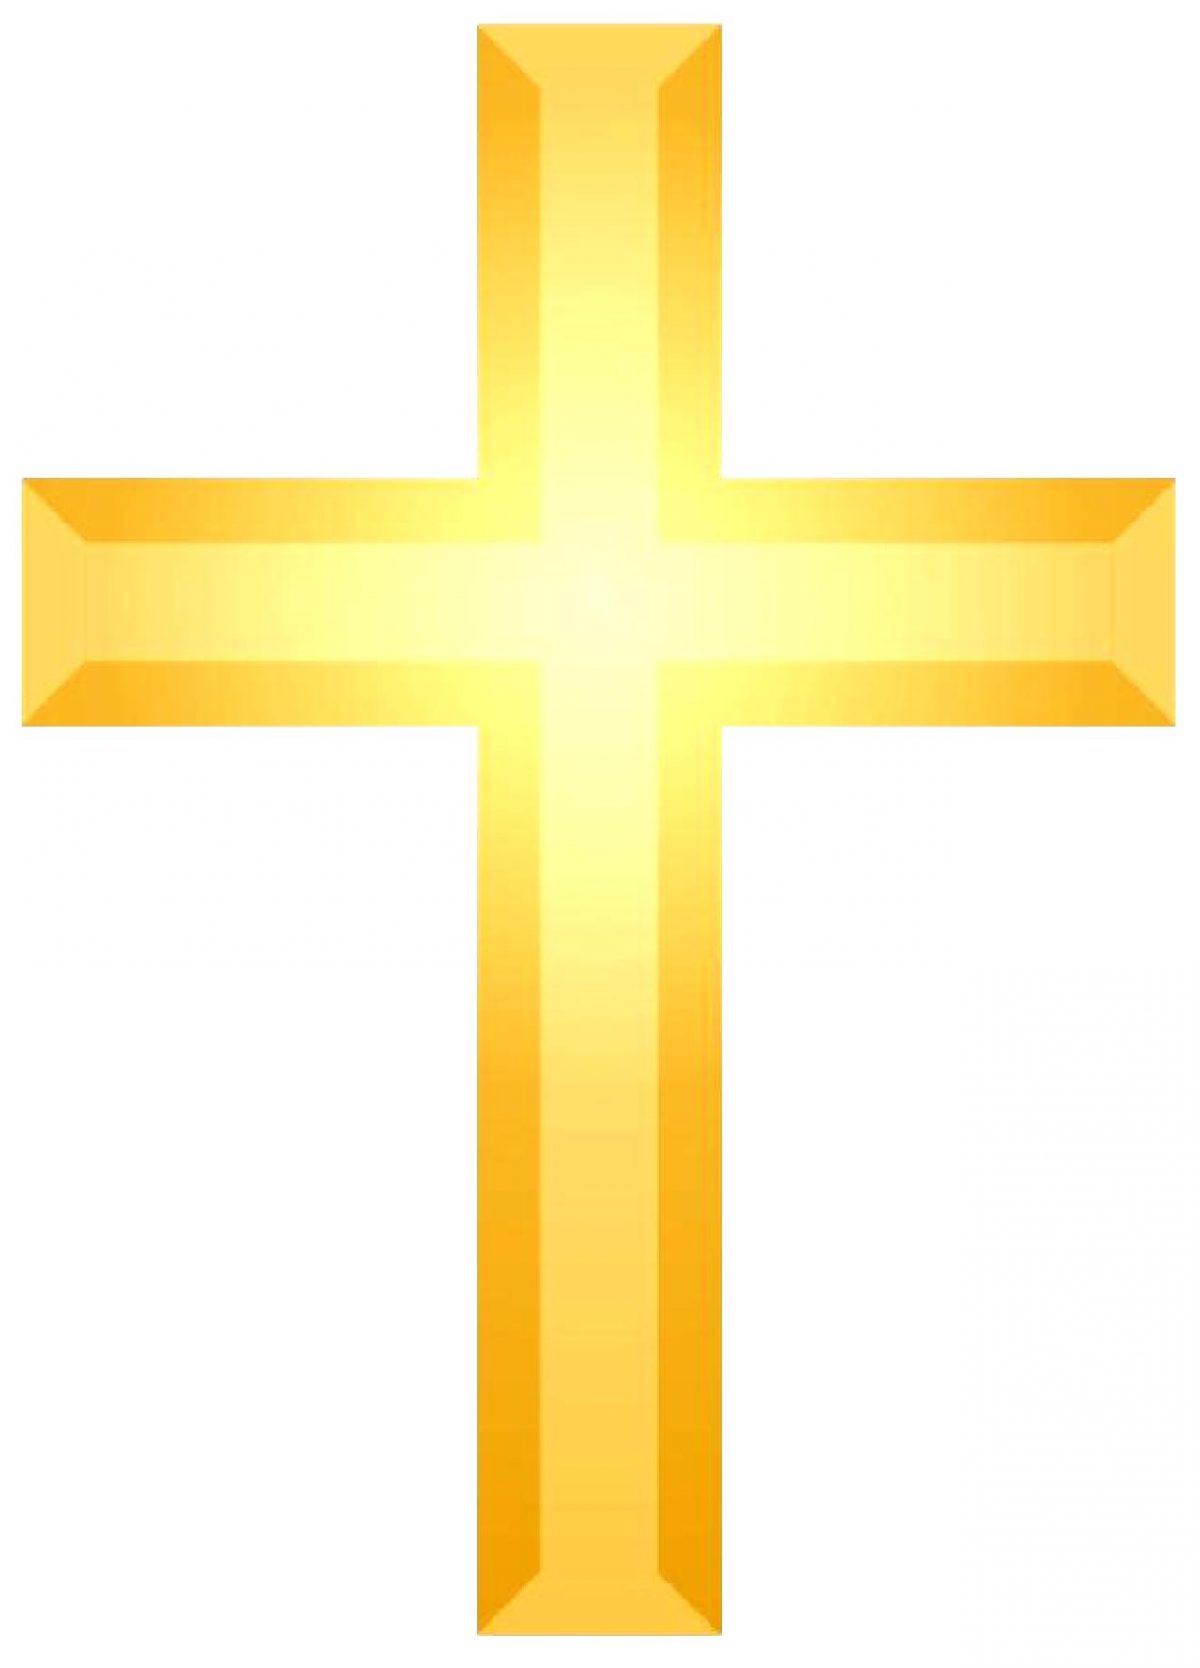 Cross used to Commonly Represent Christianity